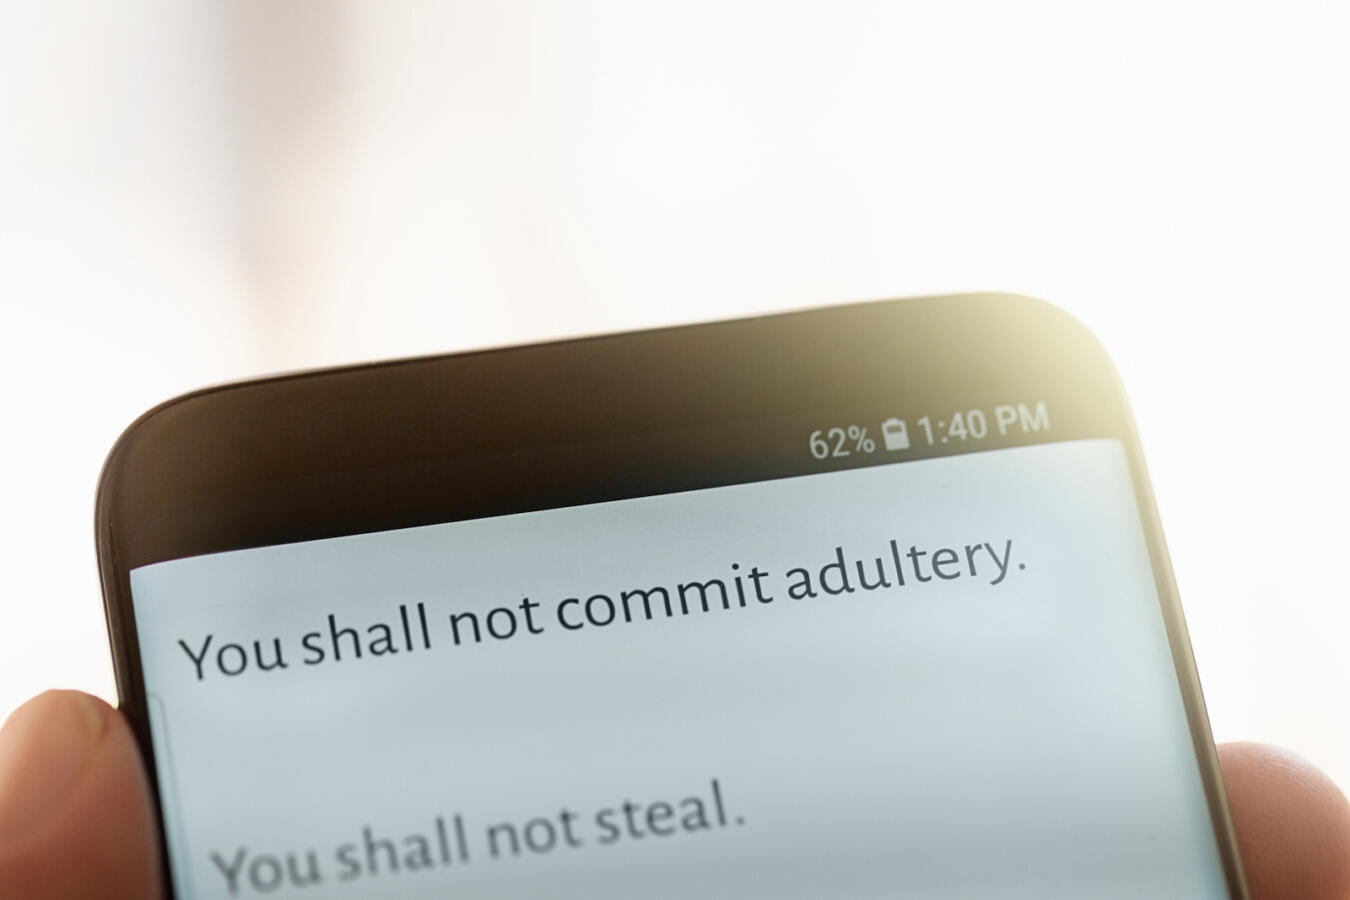 A text message displayed on a mobile phone screen from the Bible's Ten Commandments "You shall not comit adultery"